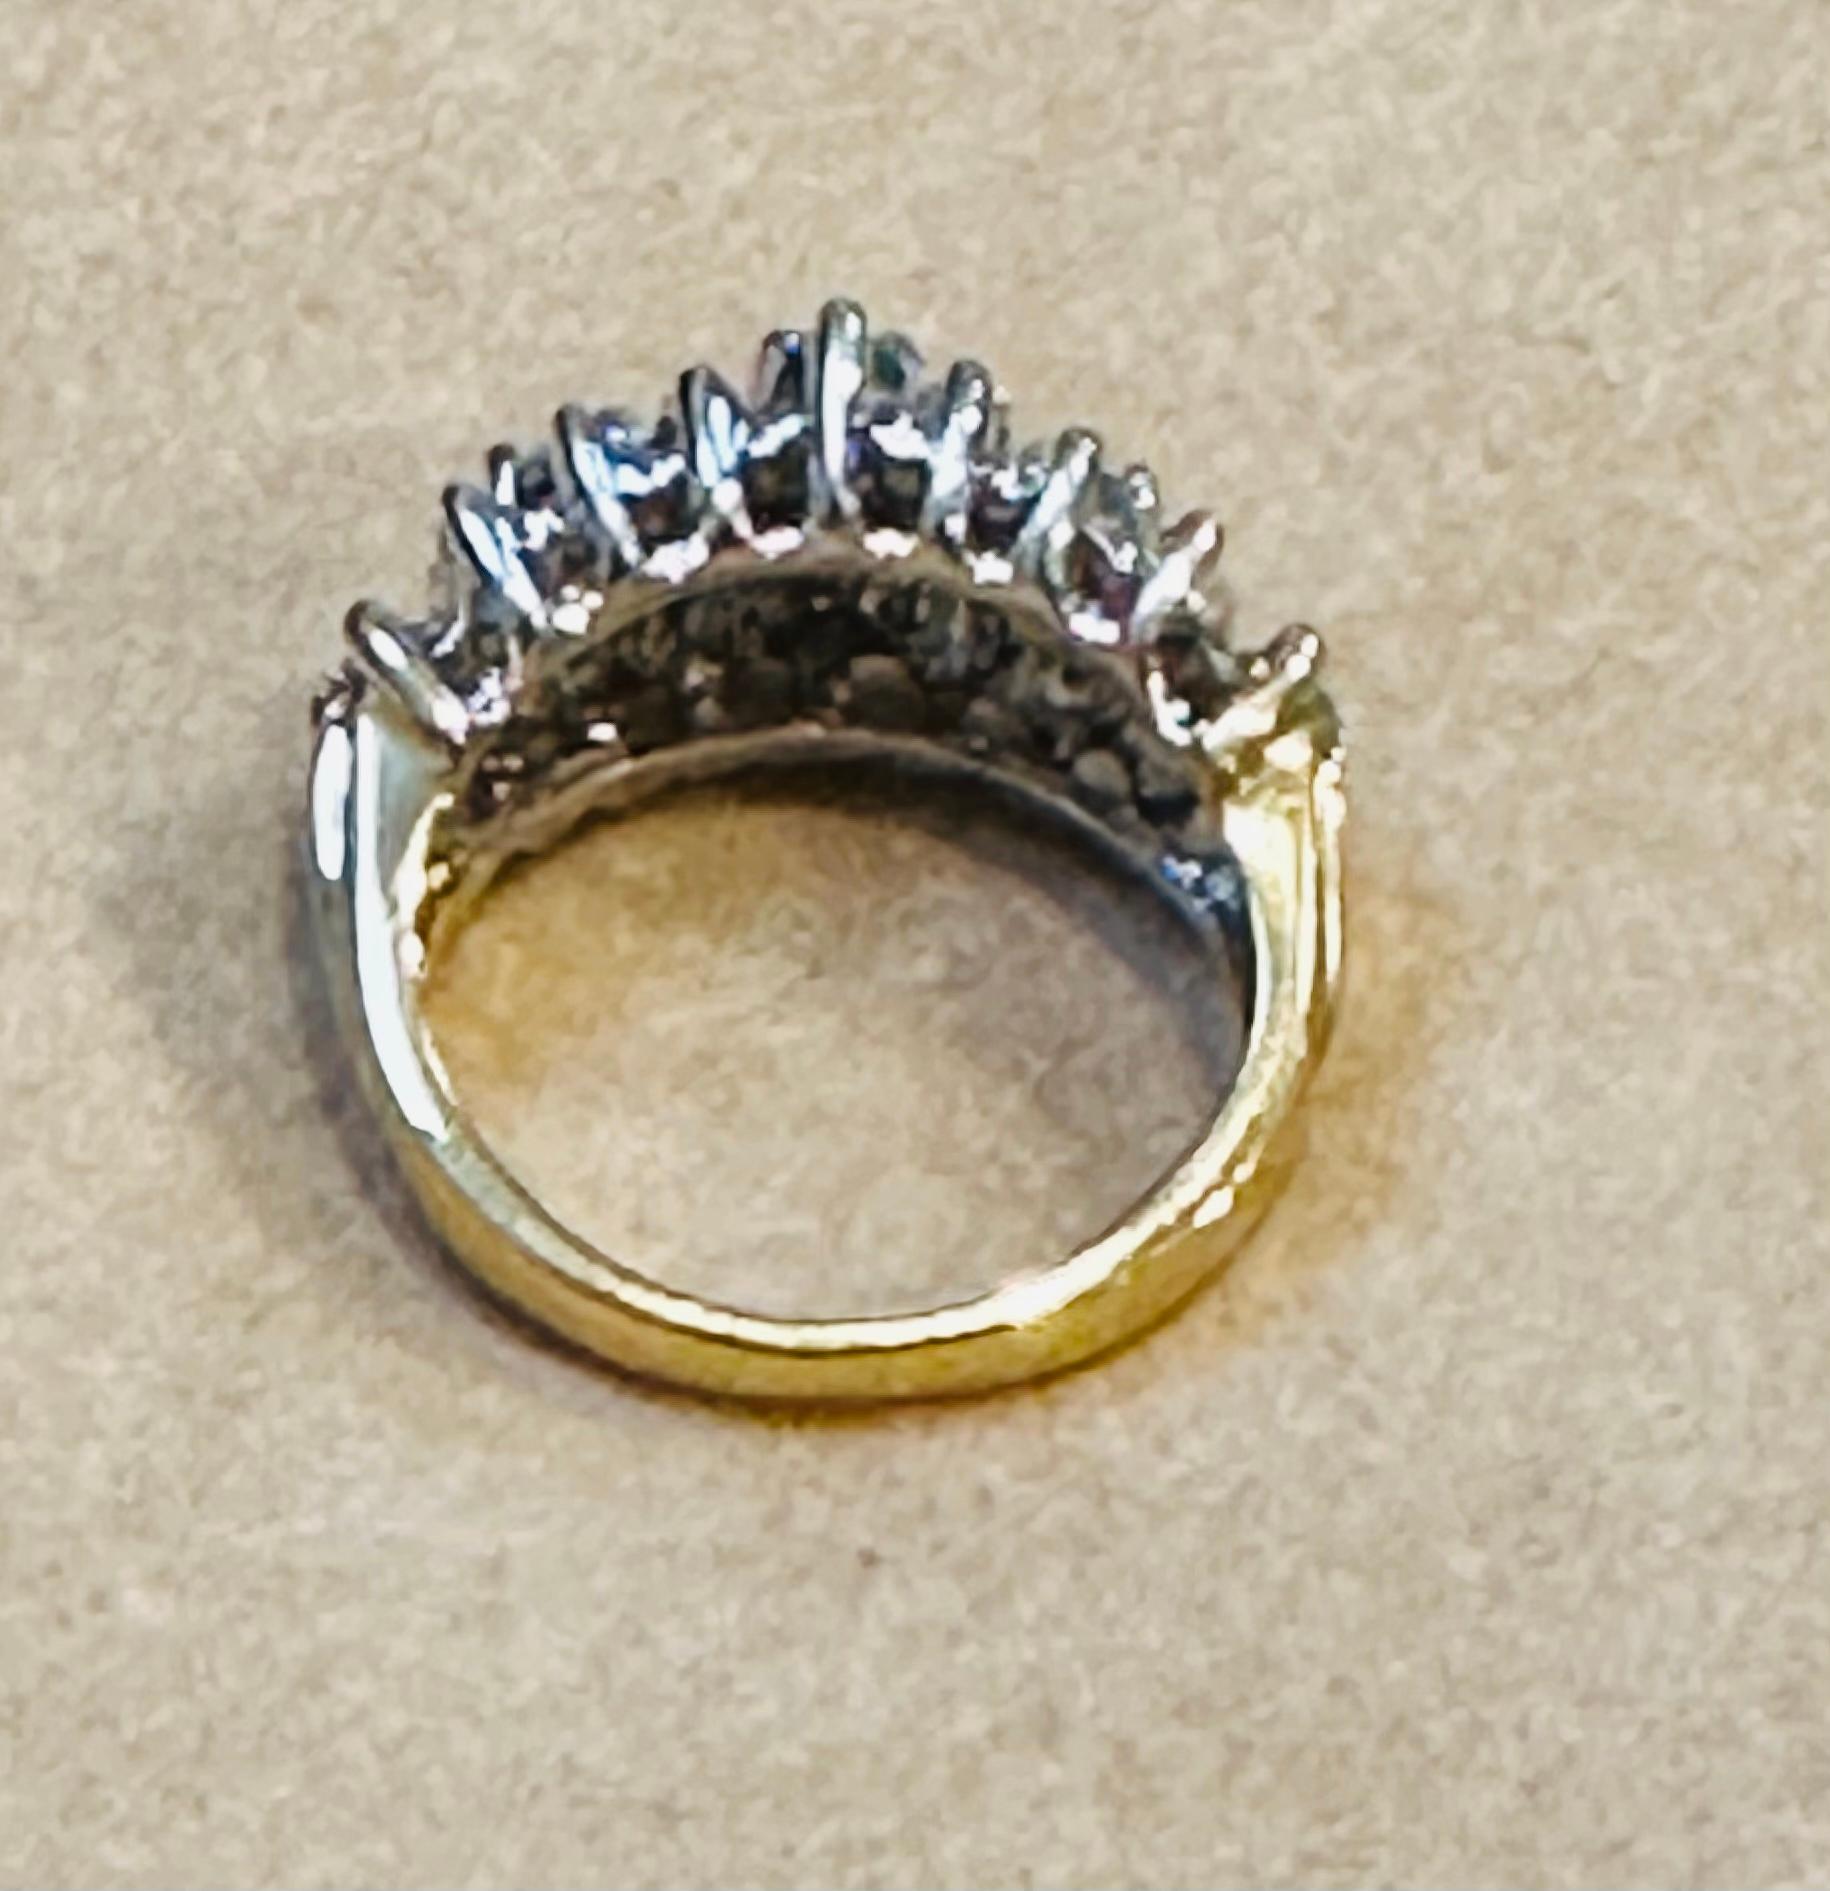 2.8 Carat Round & Baguettes Diamond Ring in 14 Karat White Gold Size 6 In Excellent Condition For Sale In New York, NY